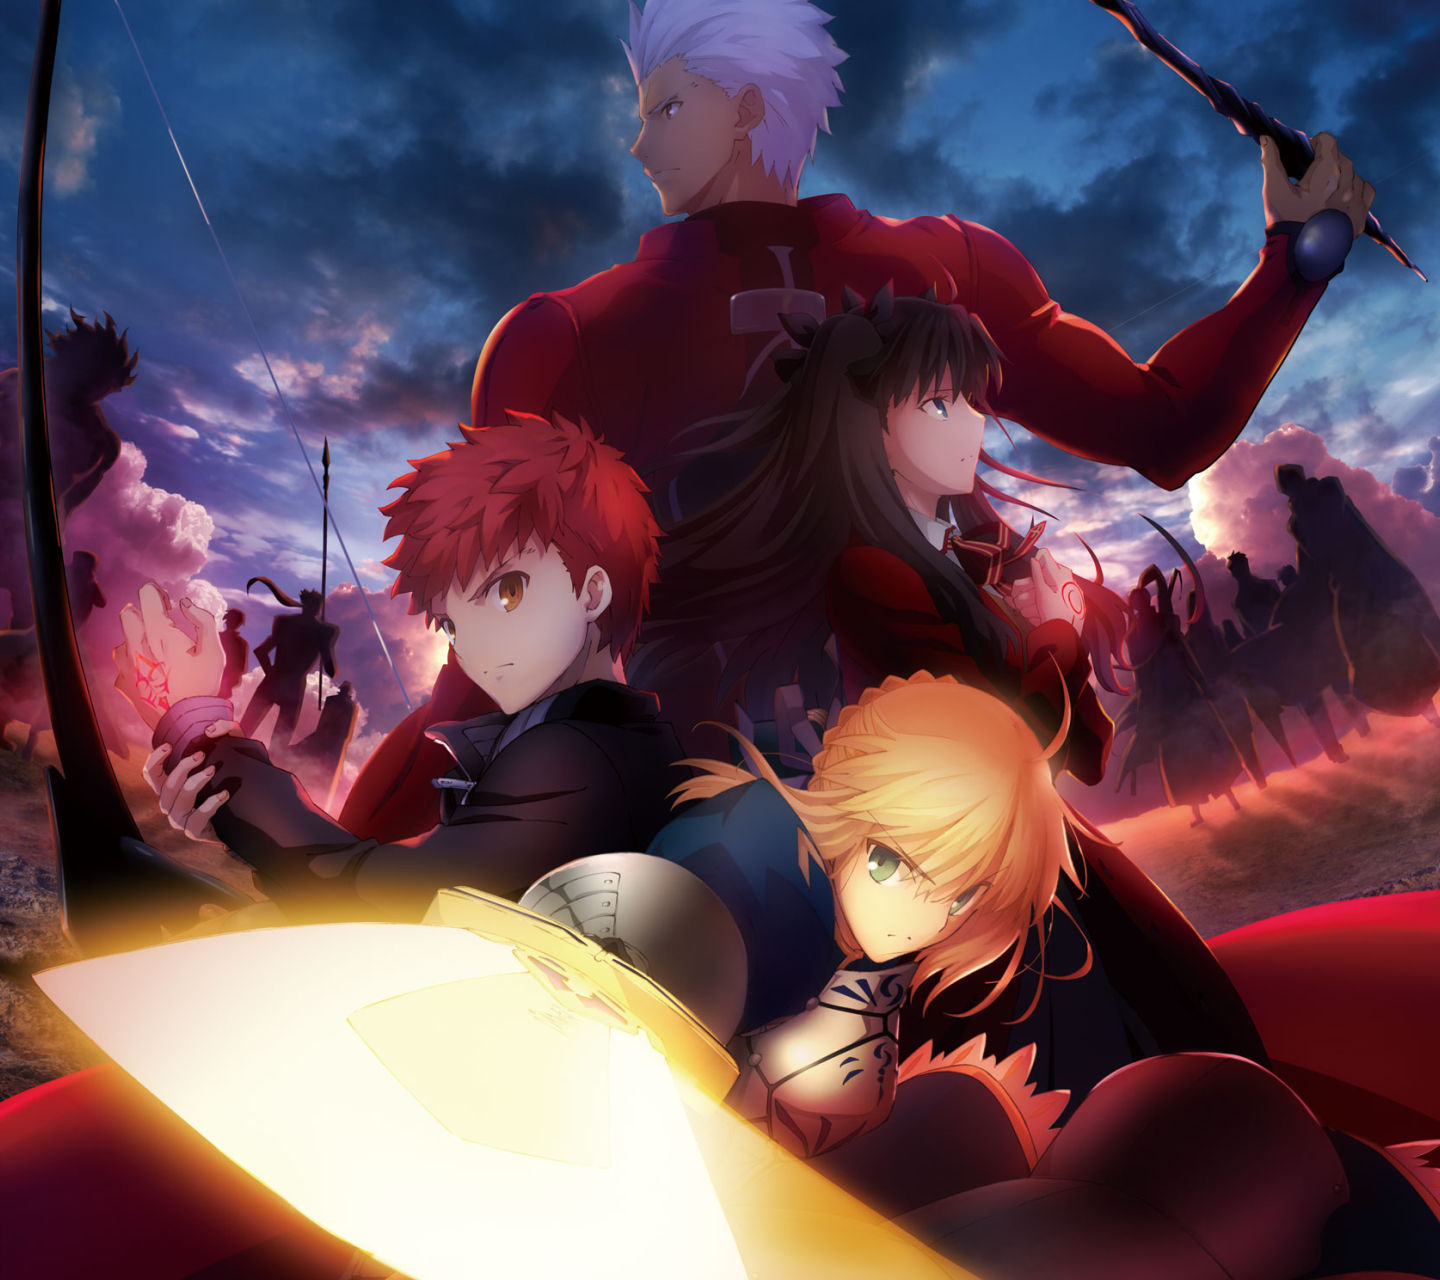 Fate Stay Night Android壁紙 画像 1 1440 1280 アニメ壁紙ネット Pc Android Iphone壁紙 画像